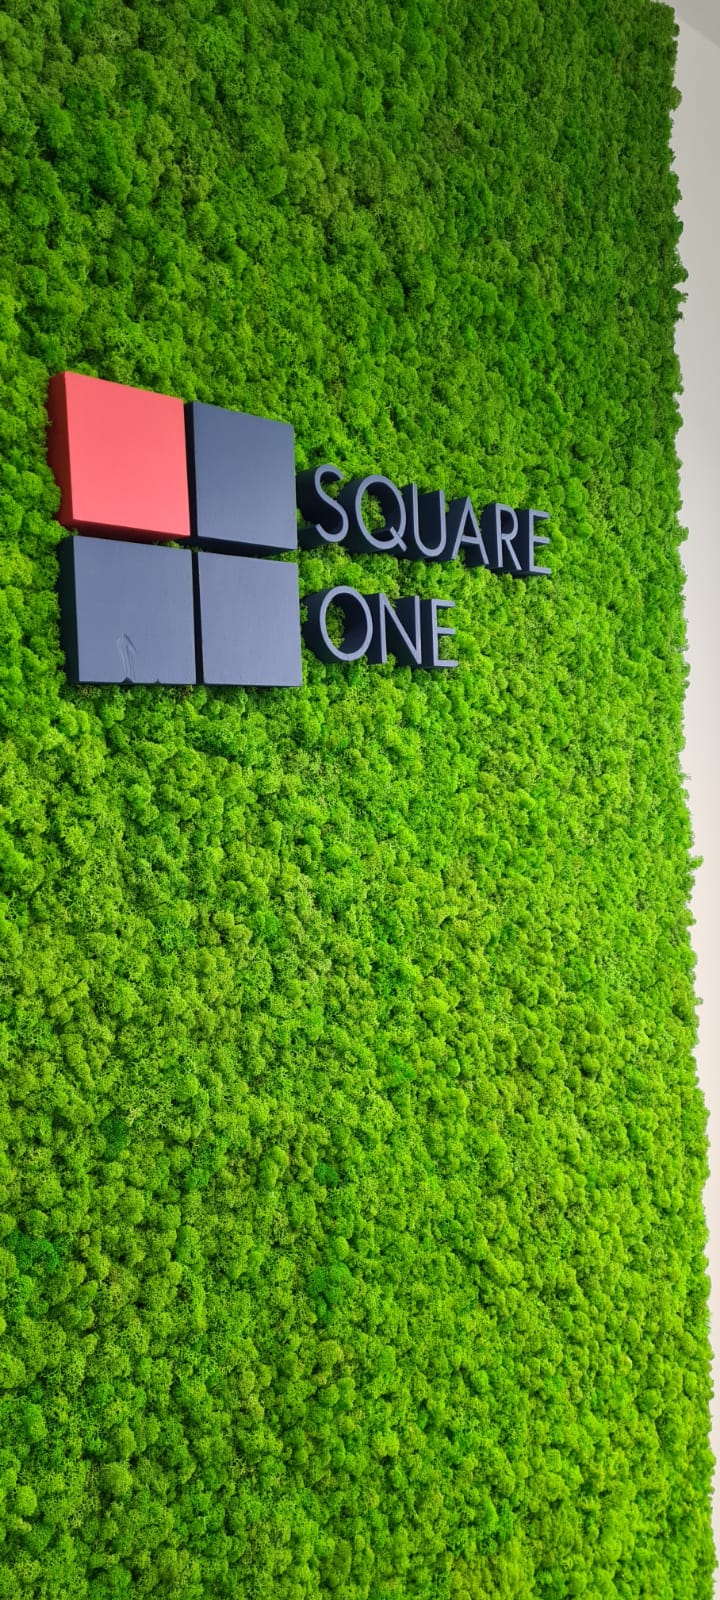 square-one-2